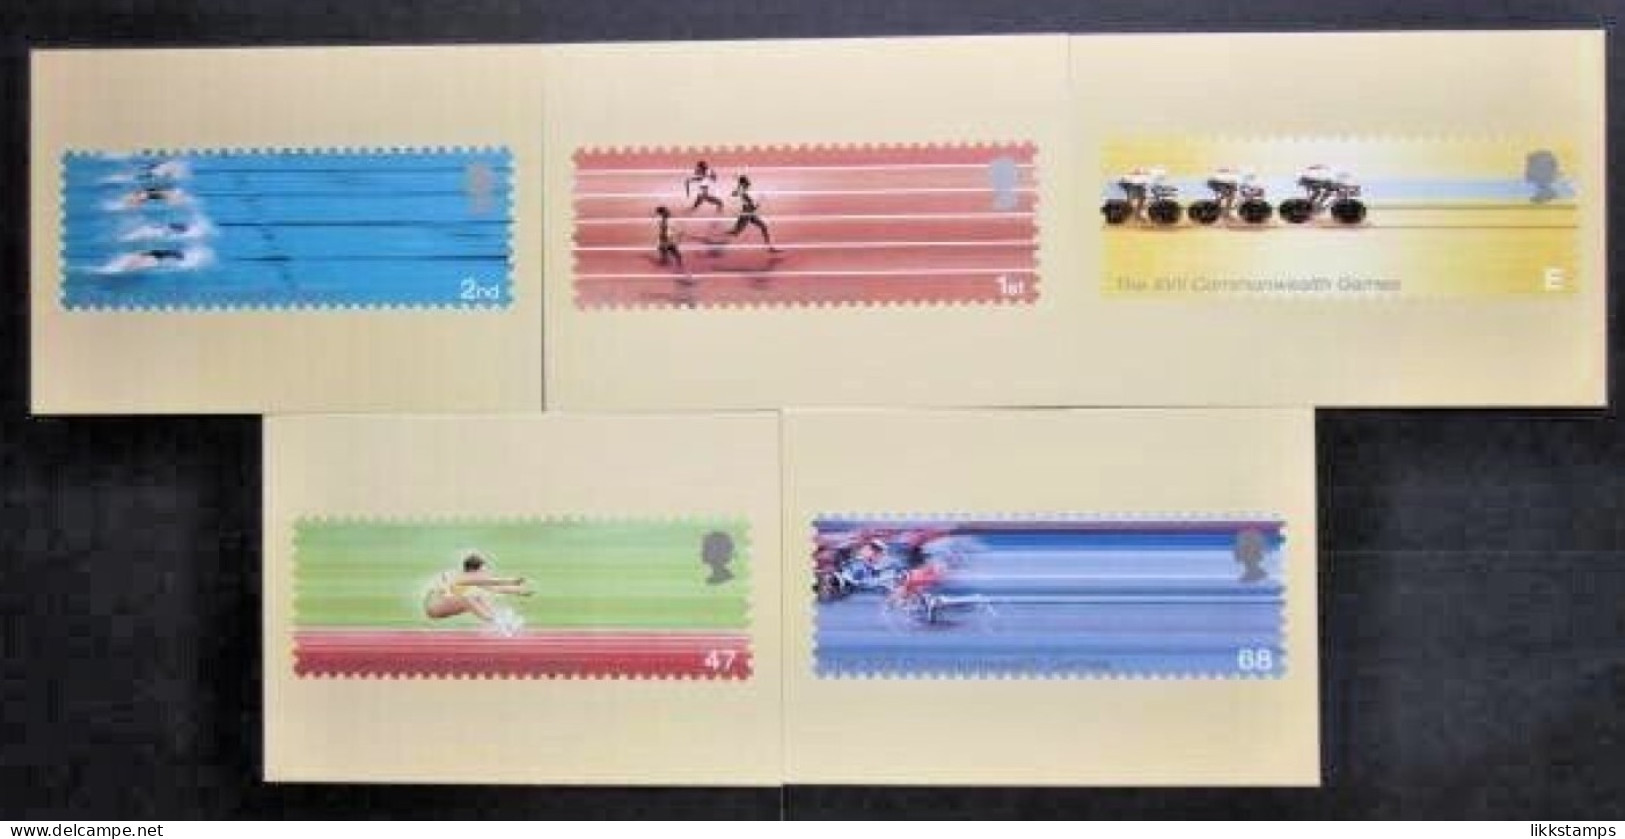 2002 THE 17th COMMONWEALTH GAMES P.H.Q. CARDS UNUSED, ISSUE No. 243 (A) #01700 - Carte PHQ